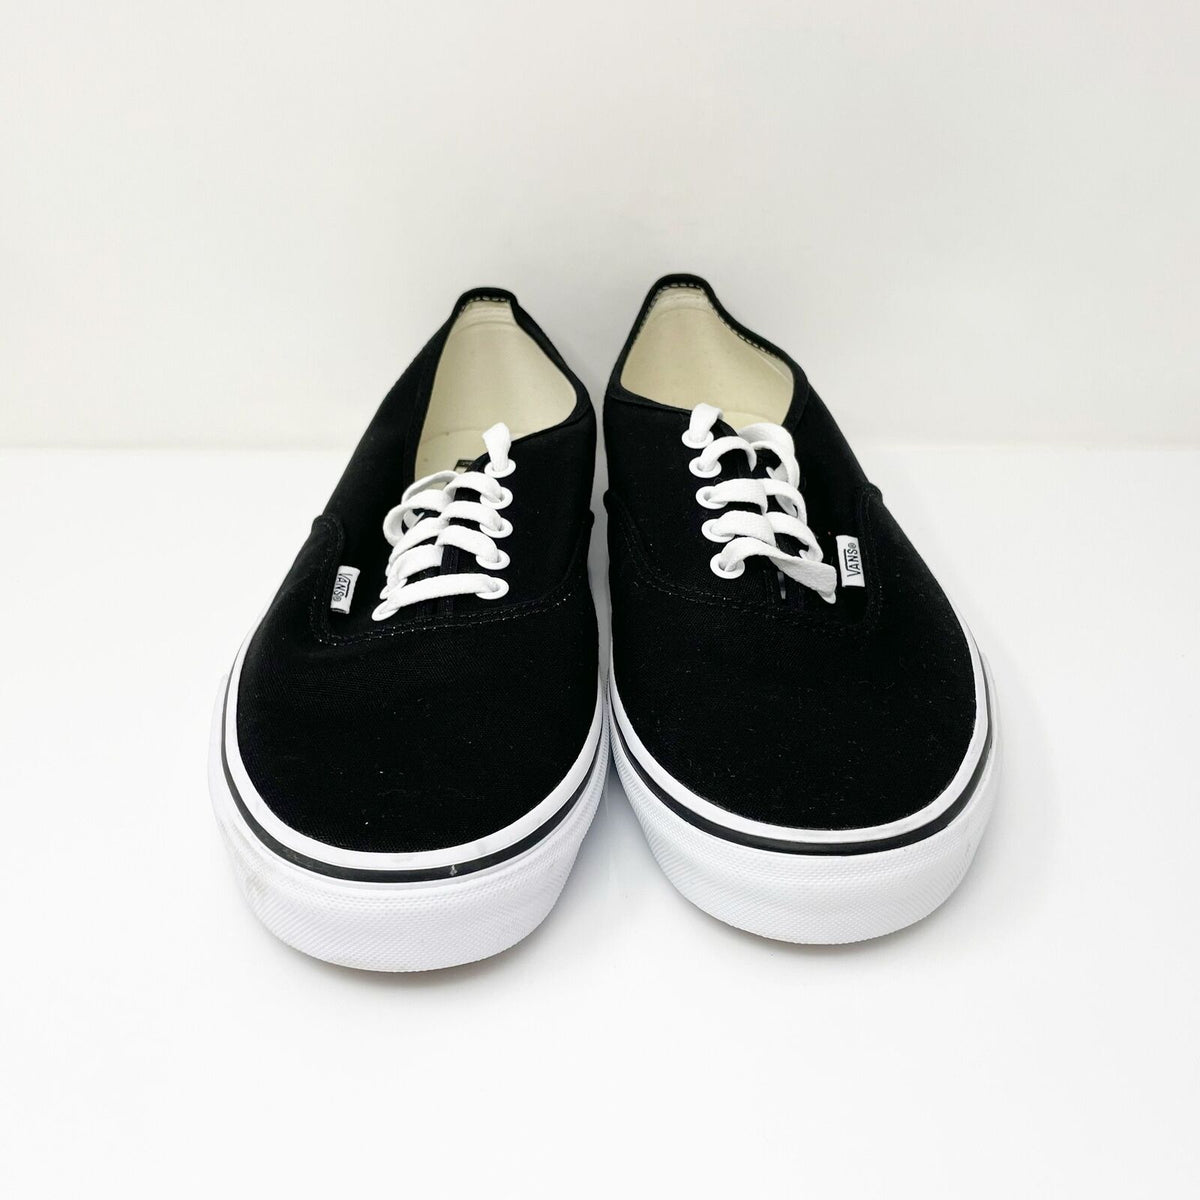 Vans Mens Off The Wall 721454 Black Casual Shoes Sneakers Size 11 W ...